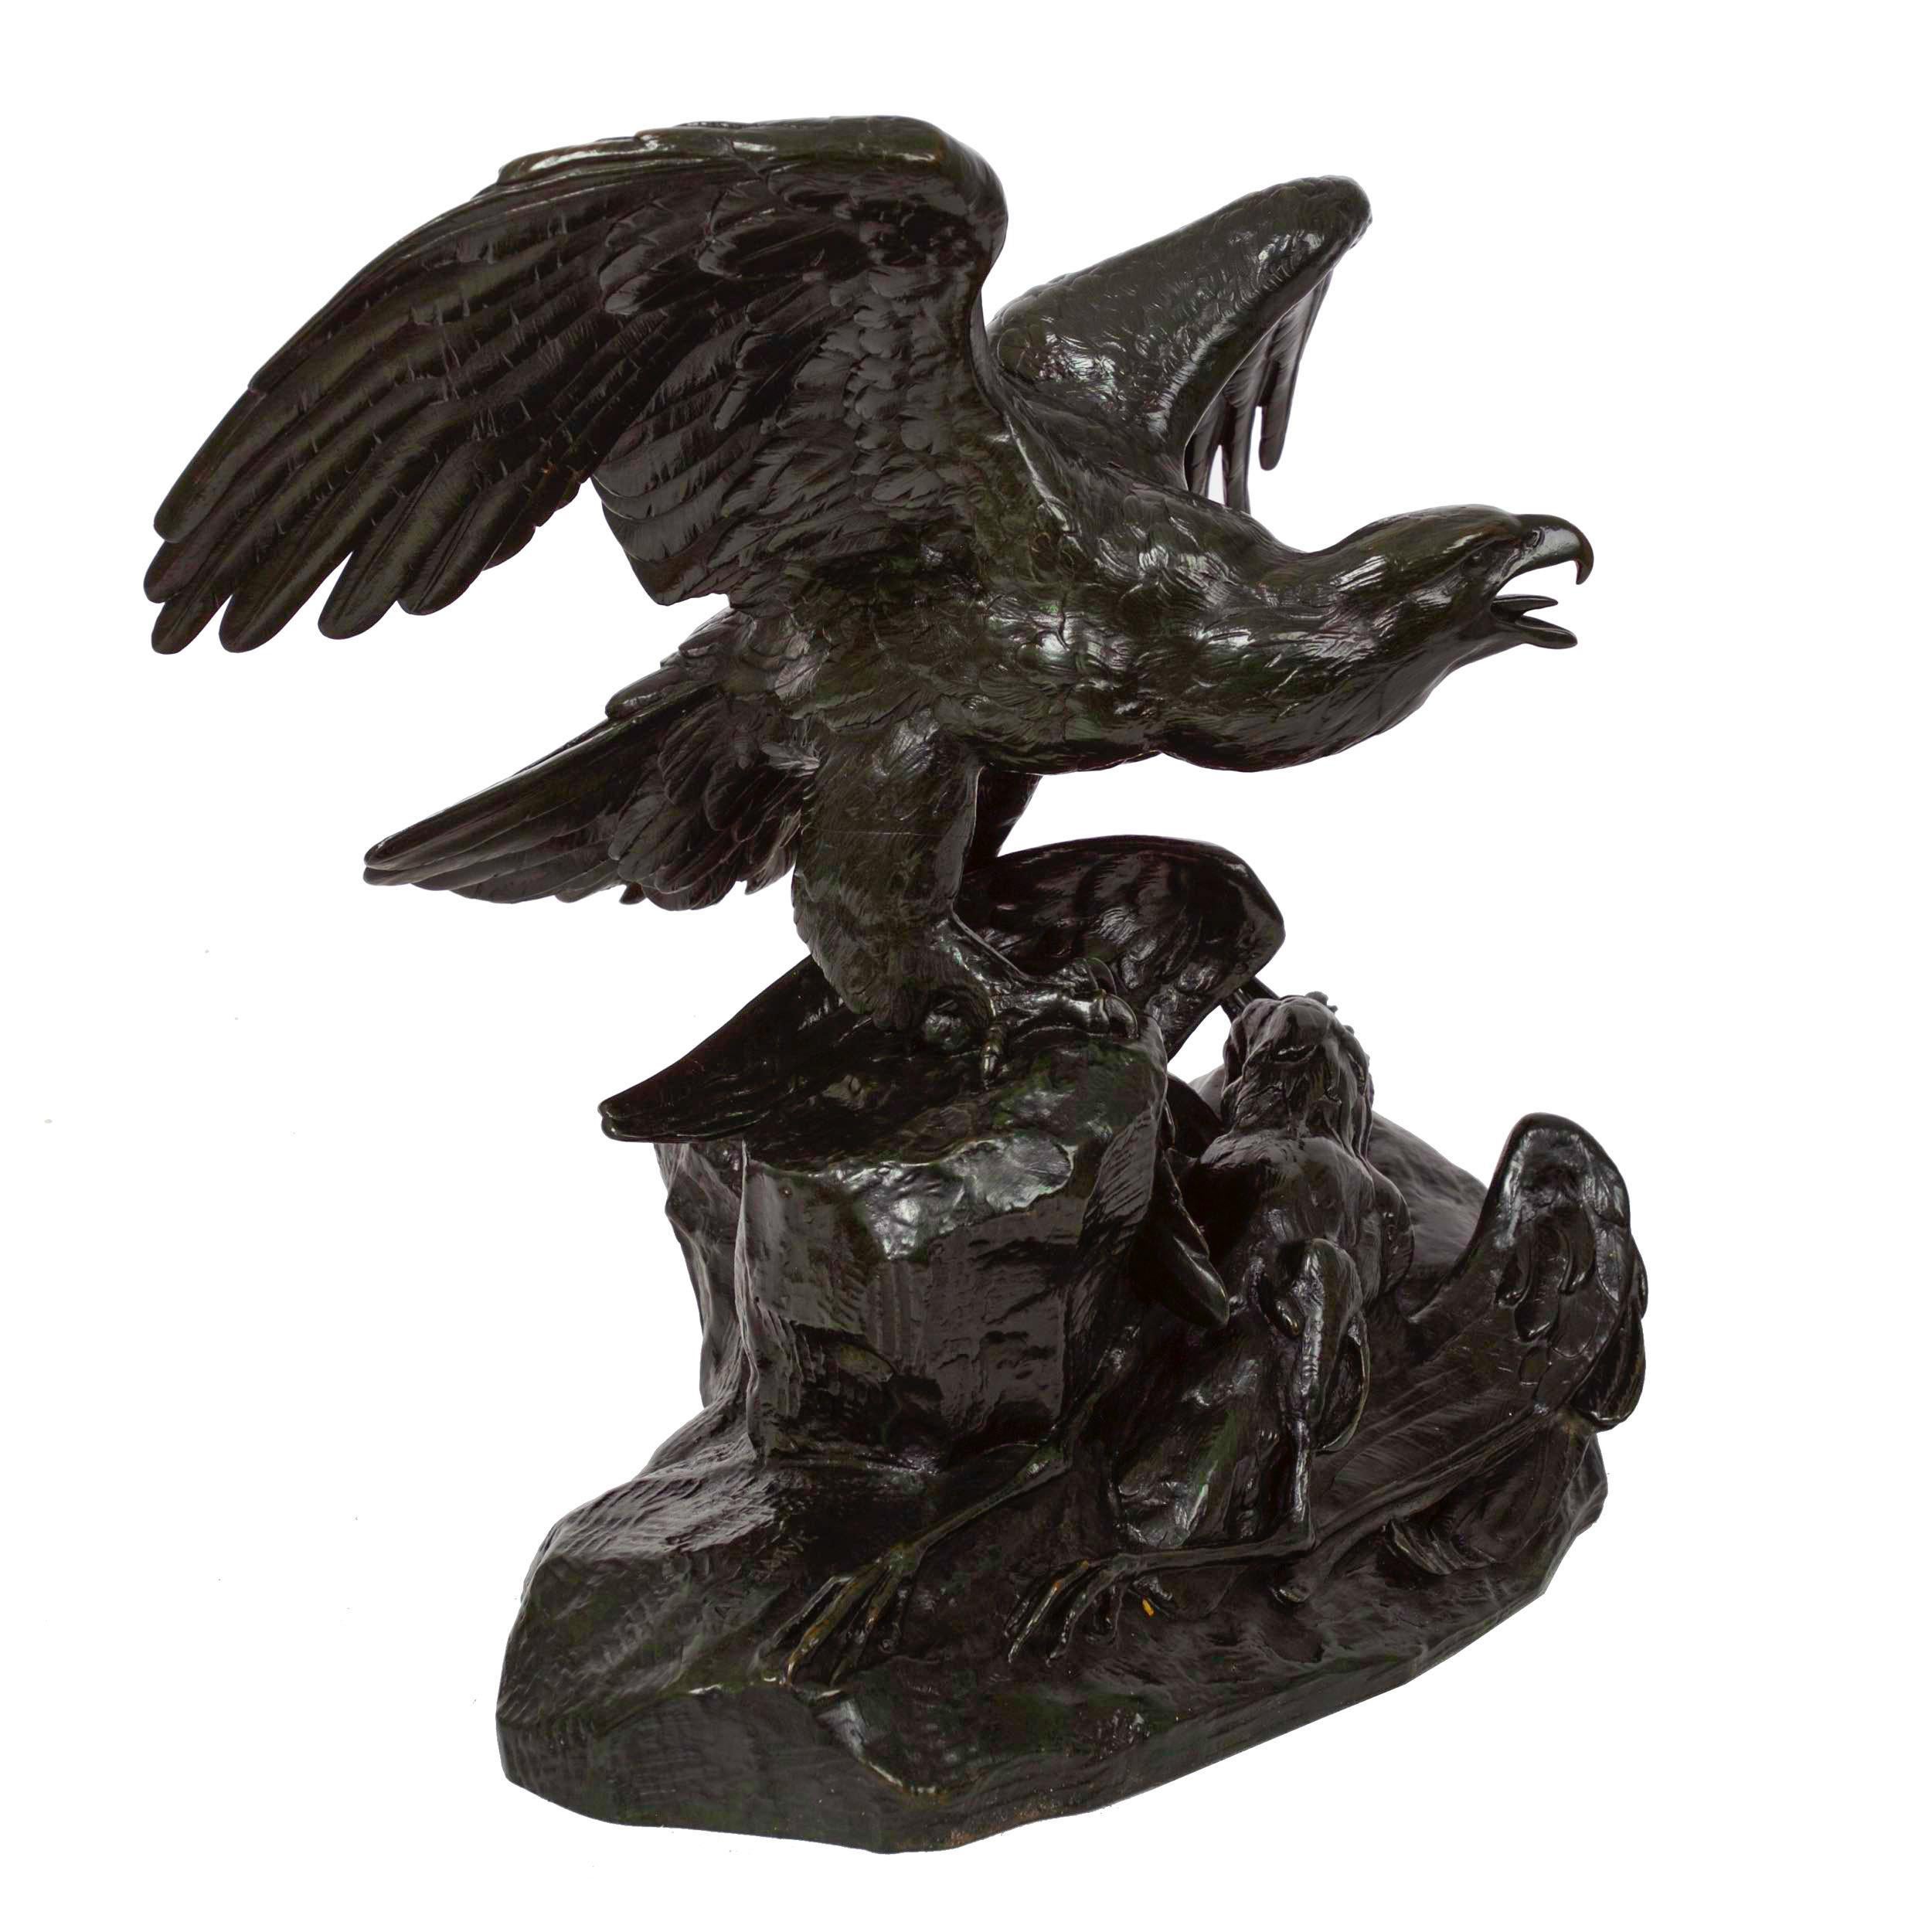 A fine post-humous casting of Barye's Eagle Holding a Heron, the original model seems to have debuted around 1836 but is first documented in Barye's catalogue around 1857 as No. 106 available for 190 francs. By 1862 he had raised the price to 200